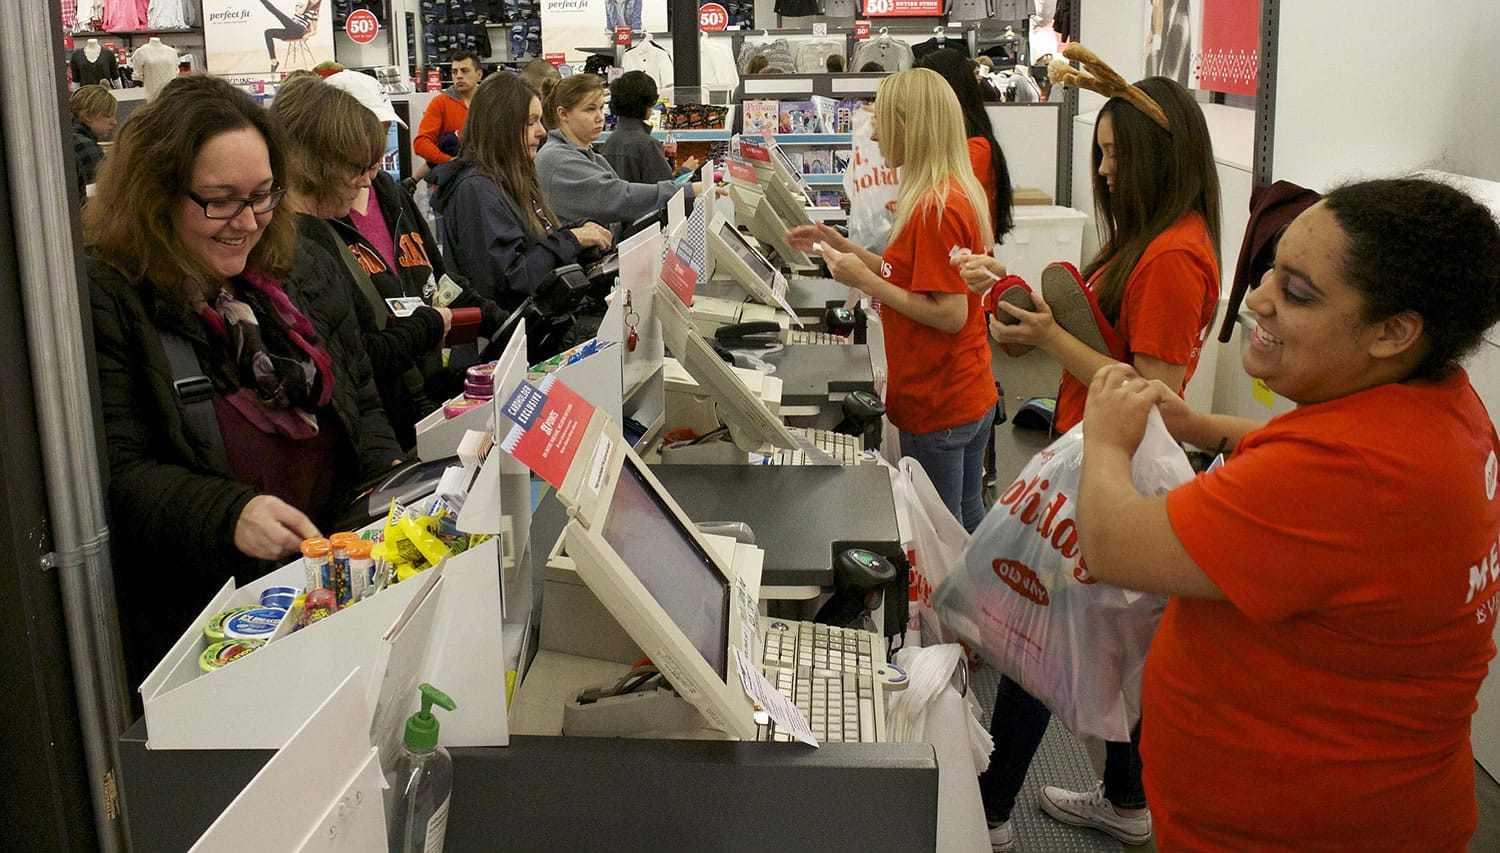 Dawn Leonard, front left, of the Brush Prairie area checks out of Old Navy at the Westfield Vancouver Mall as Mika Smith, right, helps out.